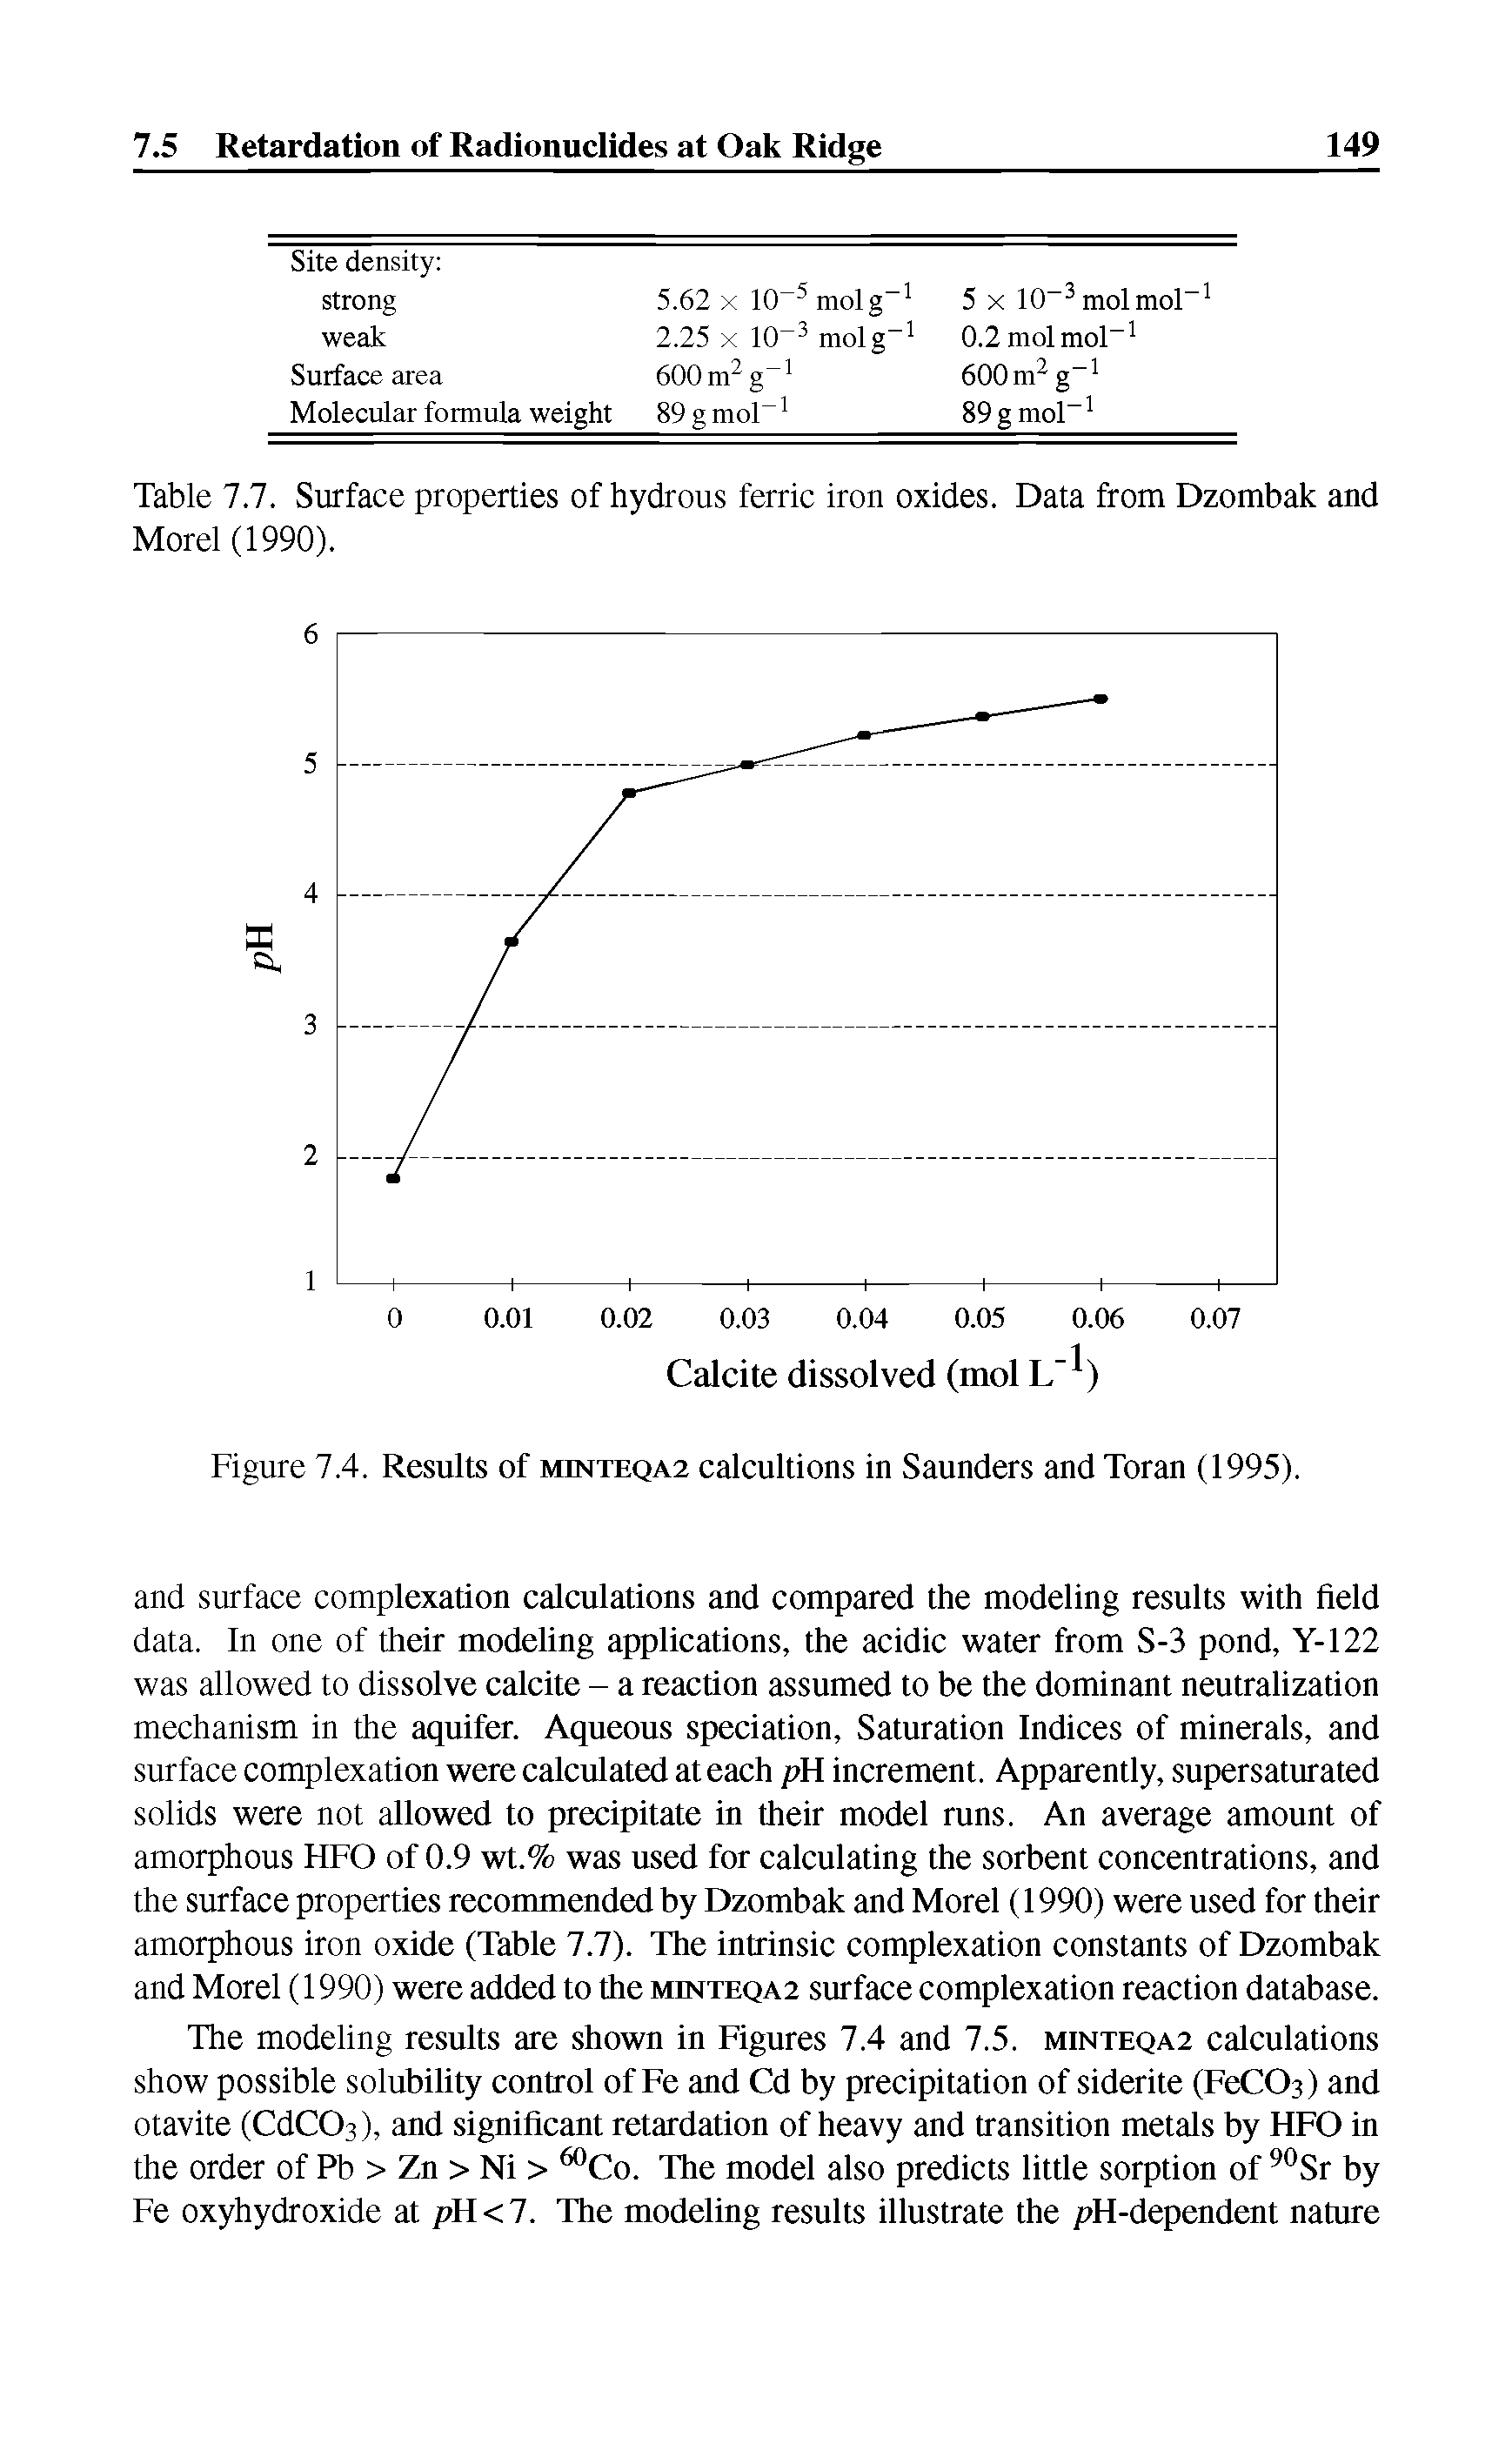 Table 7.7. Surface properties of hydrous ferric iron oxides. Data from Dzombak and Morel (1990).